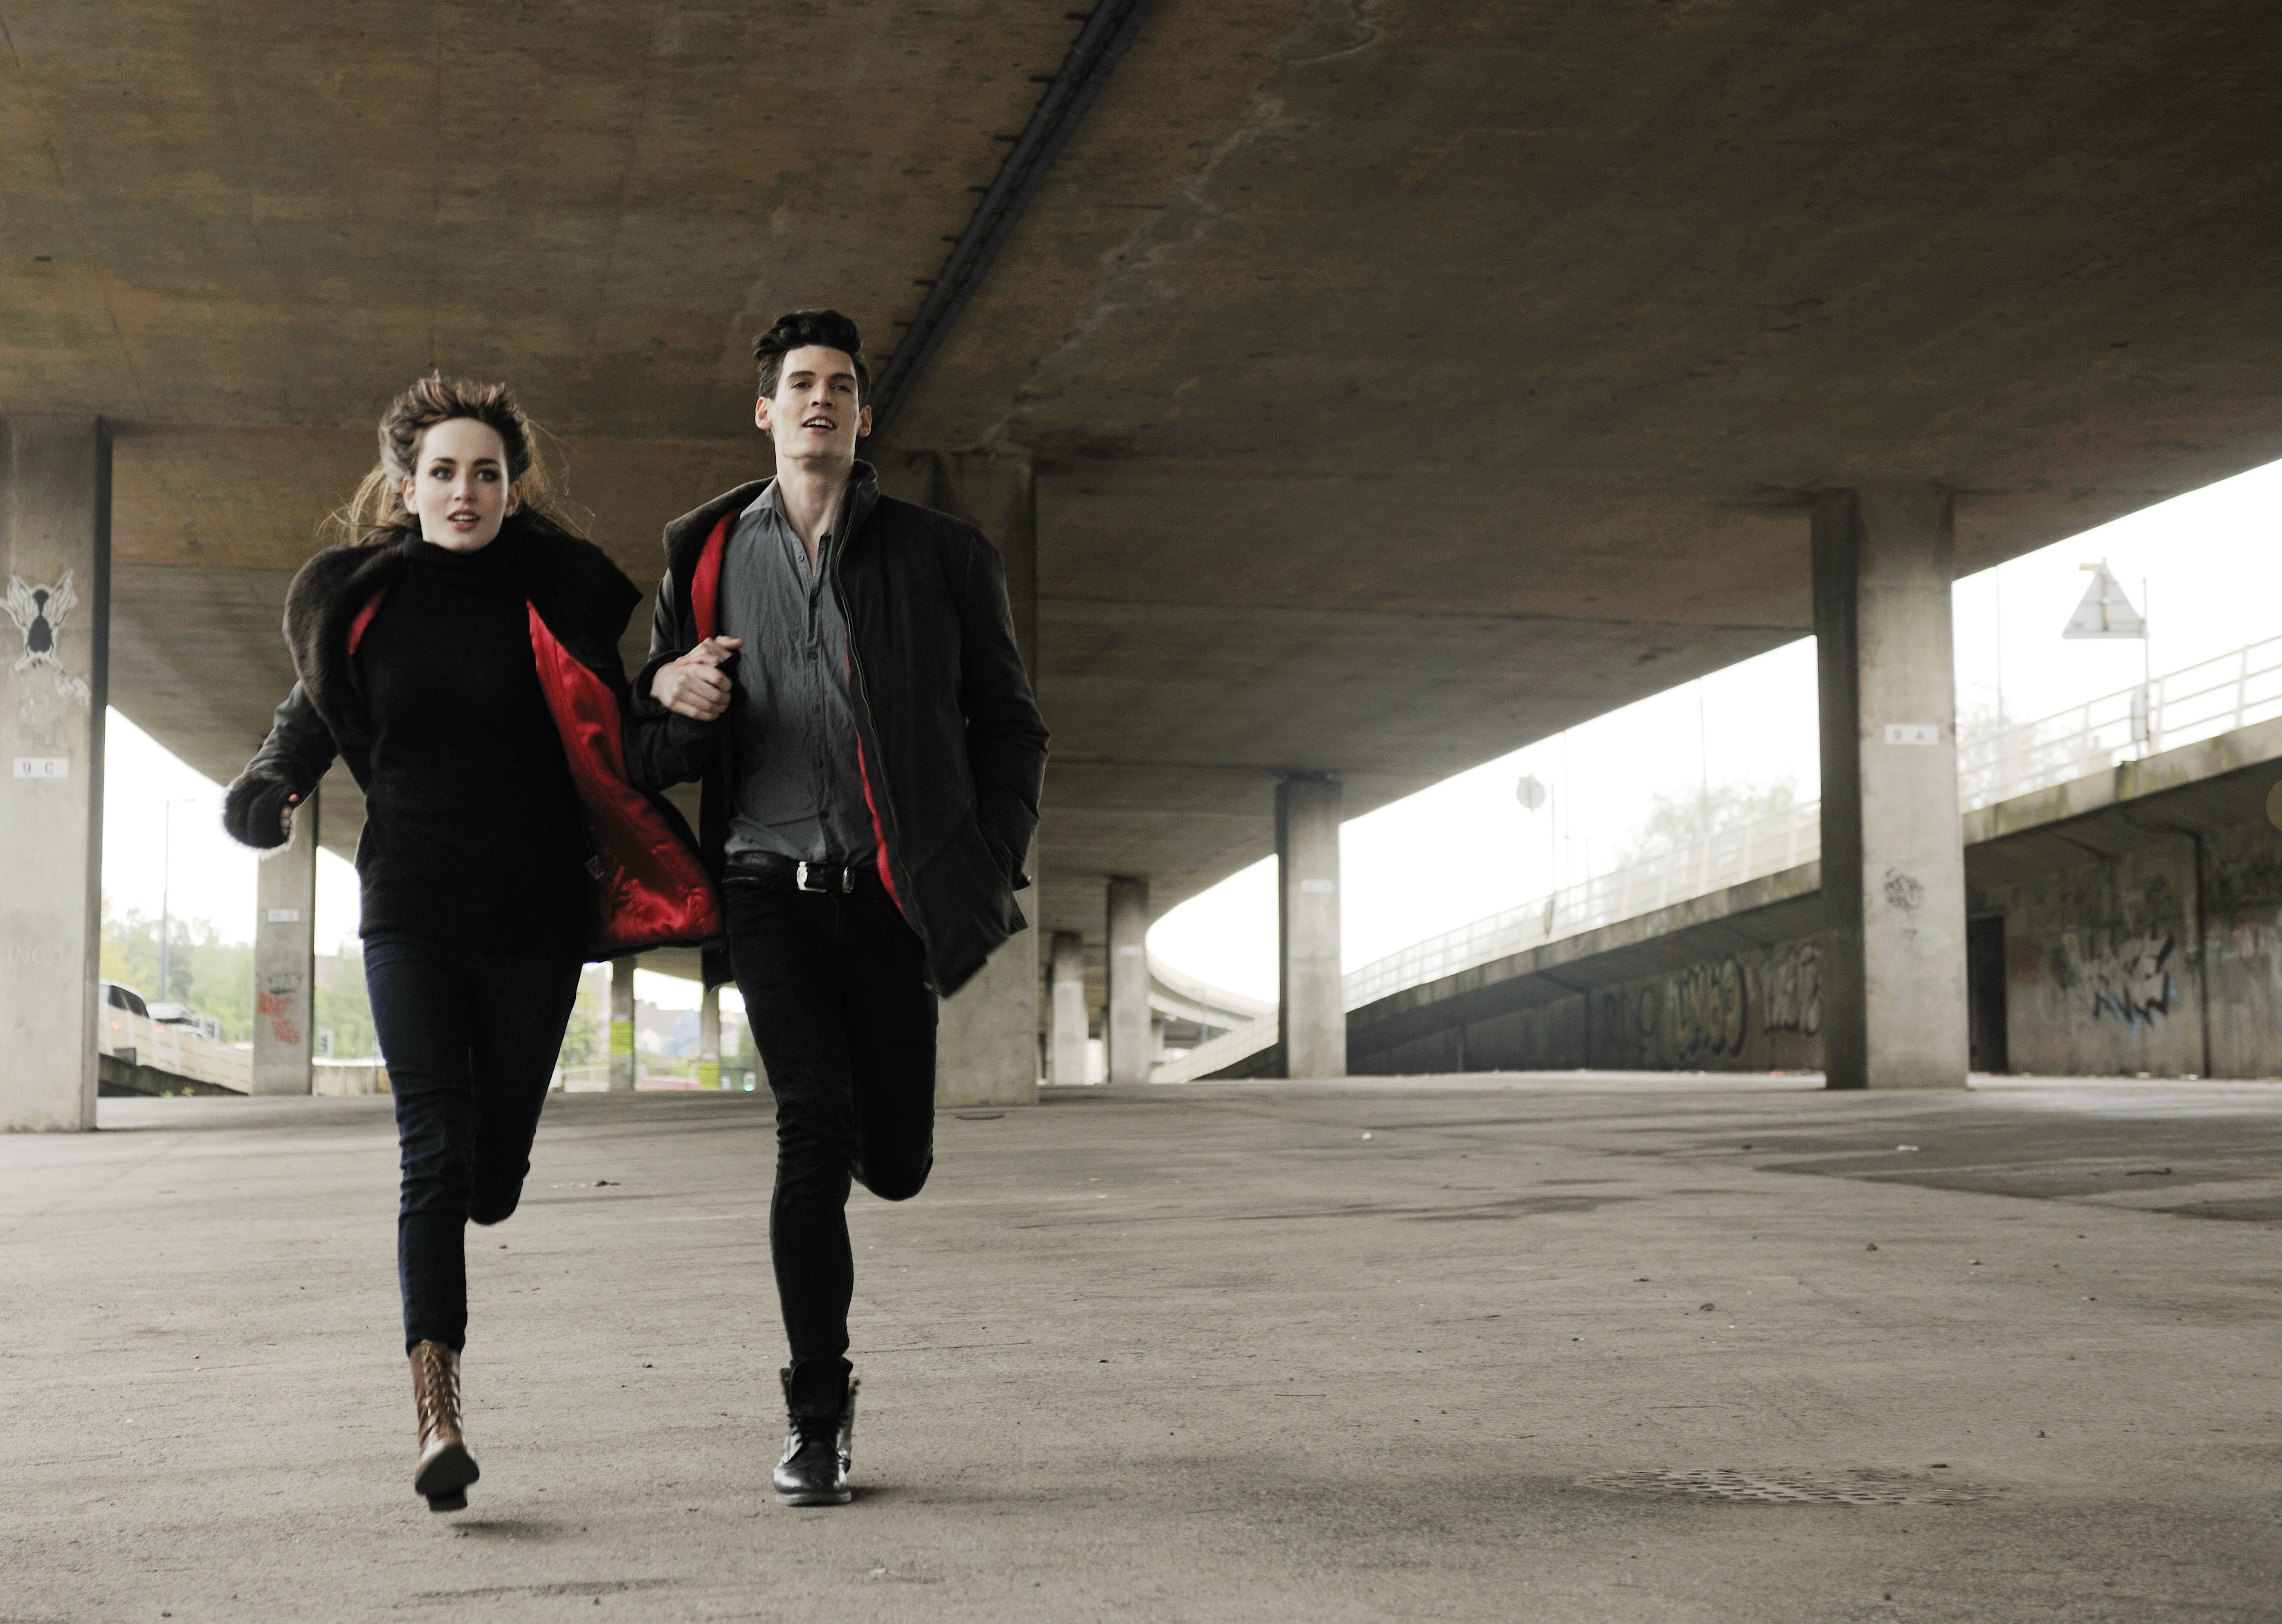 A formerly dressed couple running hand-in-hand under a bridge | Source: Pexels